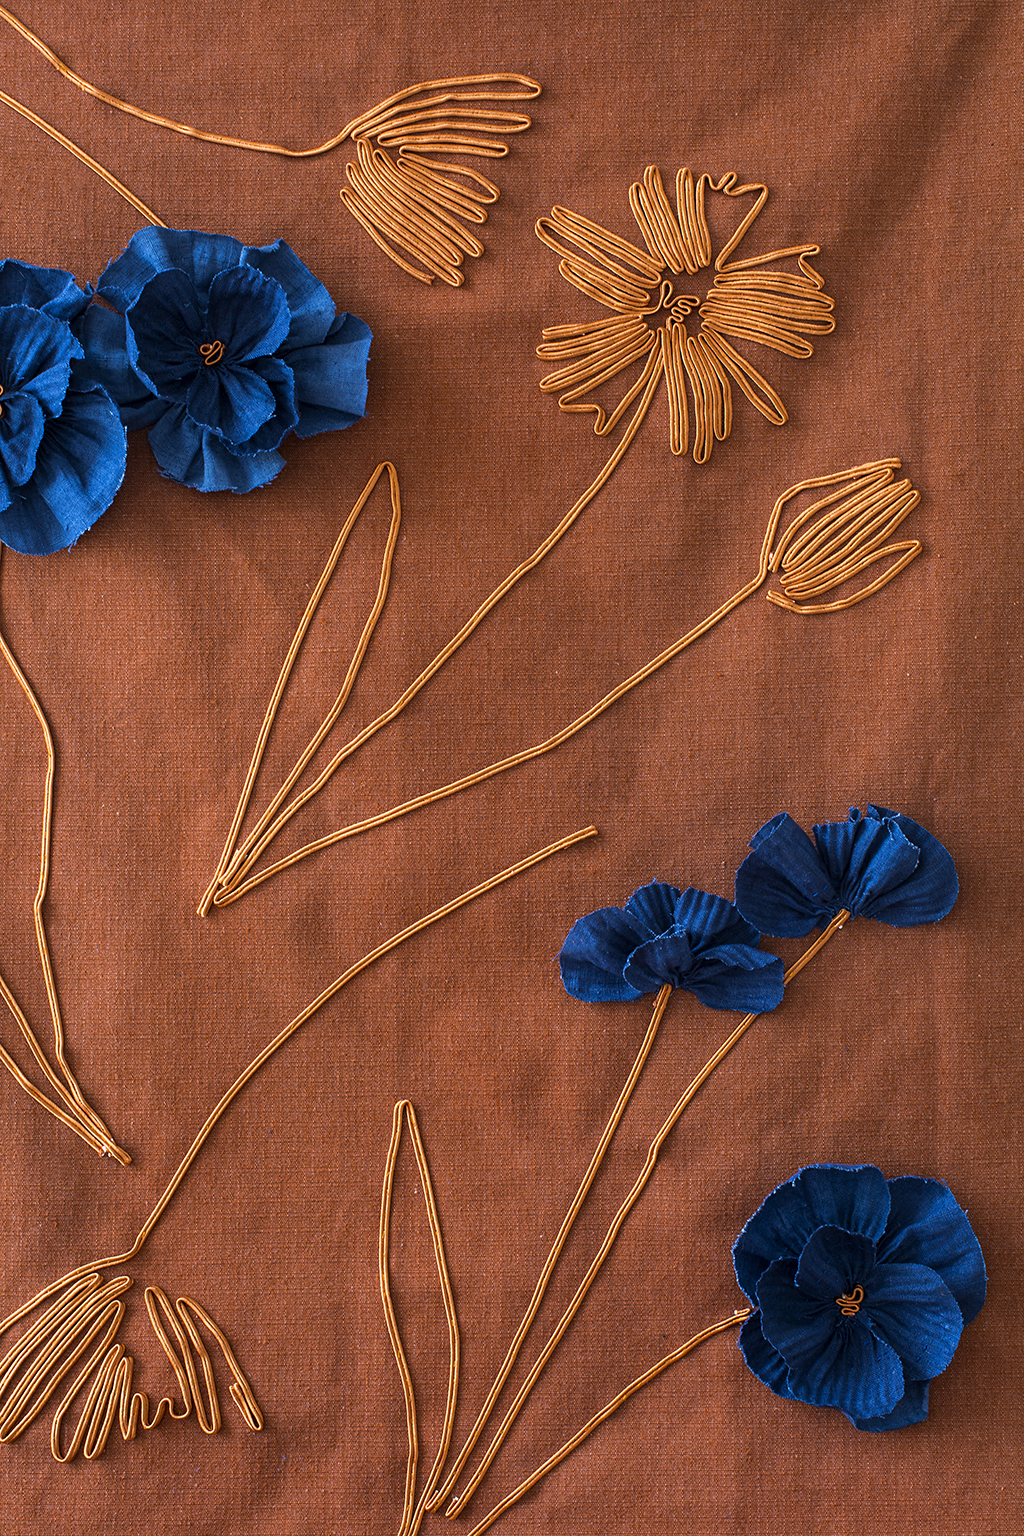 Embroidery on orange background with blue flowers.